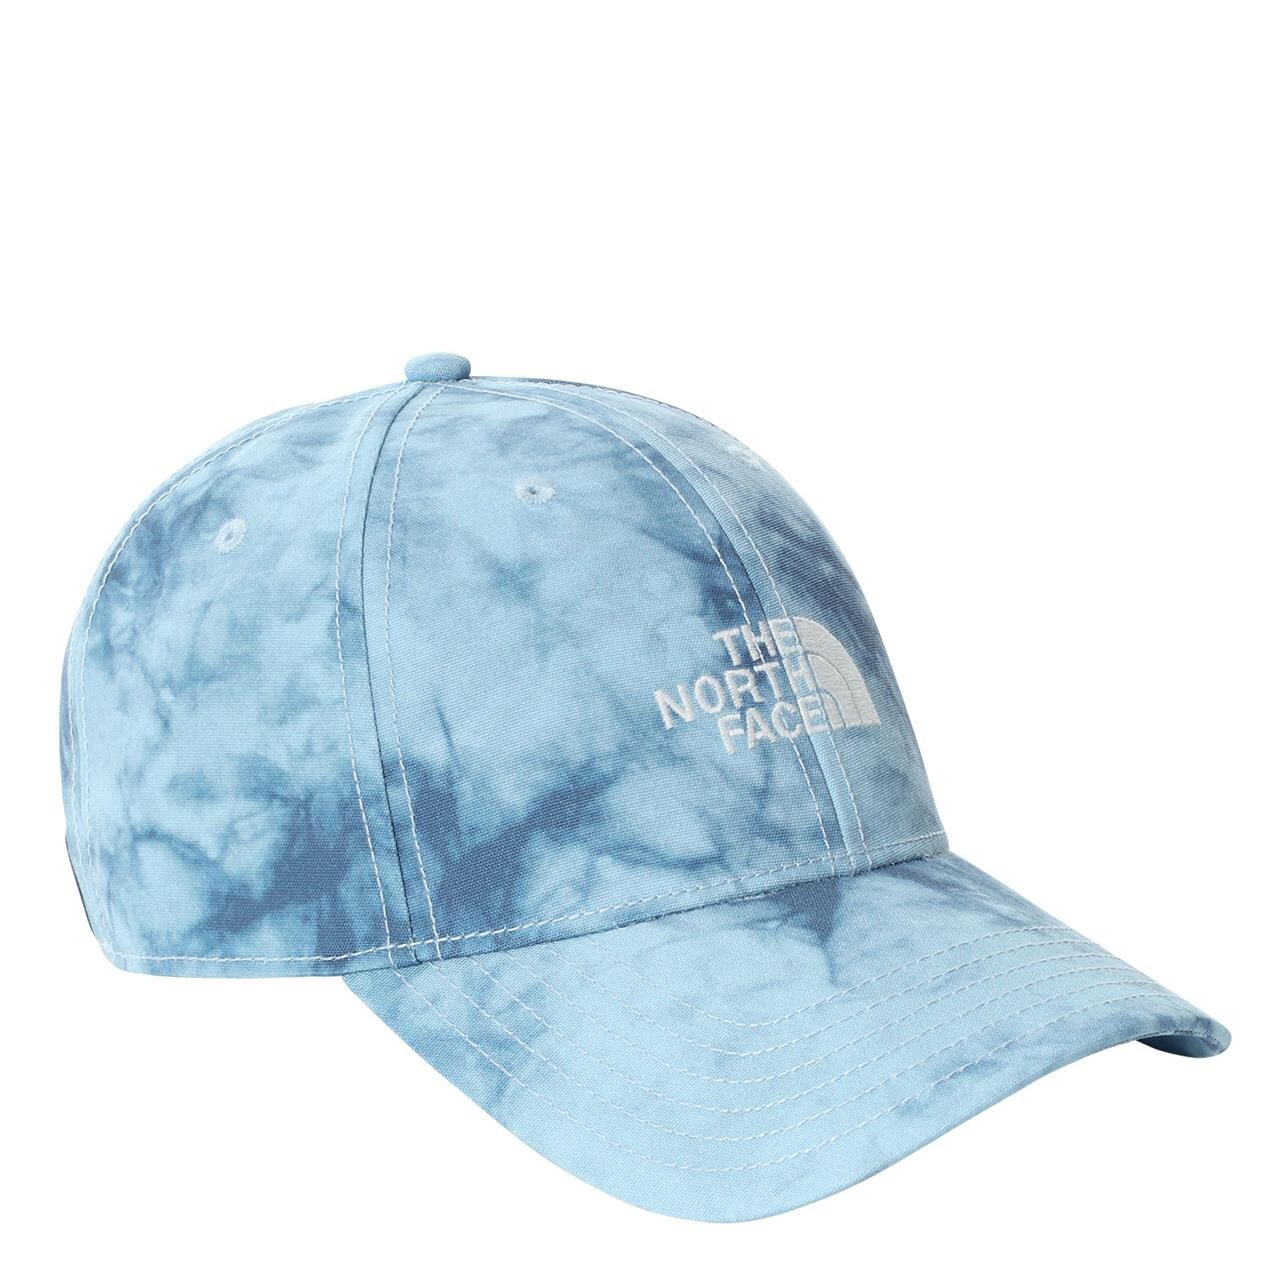 5: The North Face Recycled 66 Classic Hat (Blå (BETA BLUE TEXTURE SML PRINT) One size)